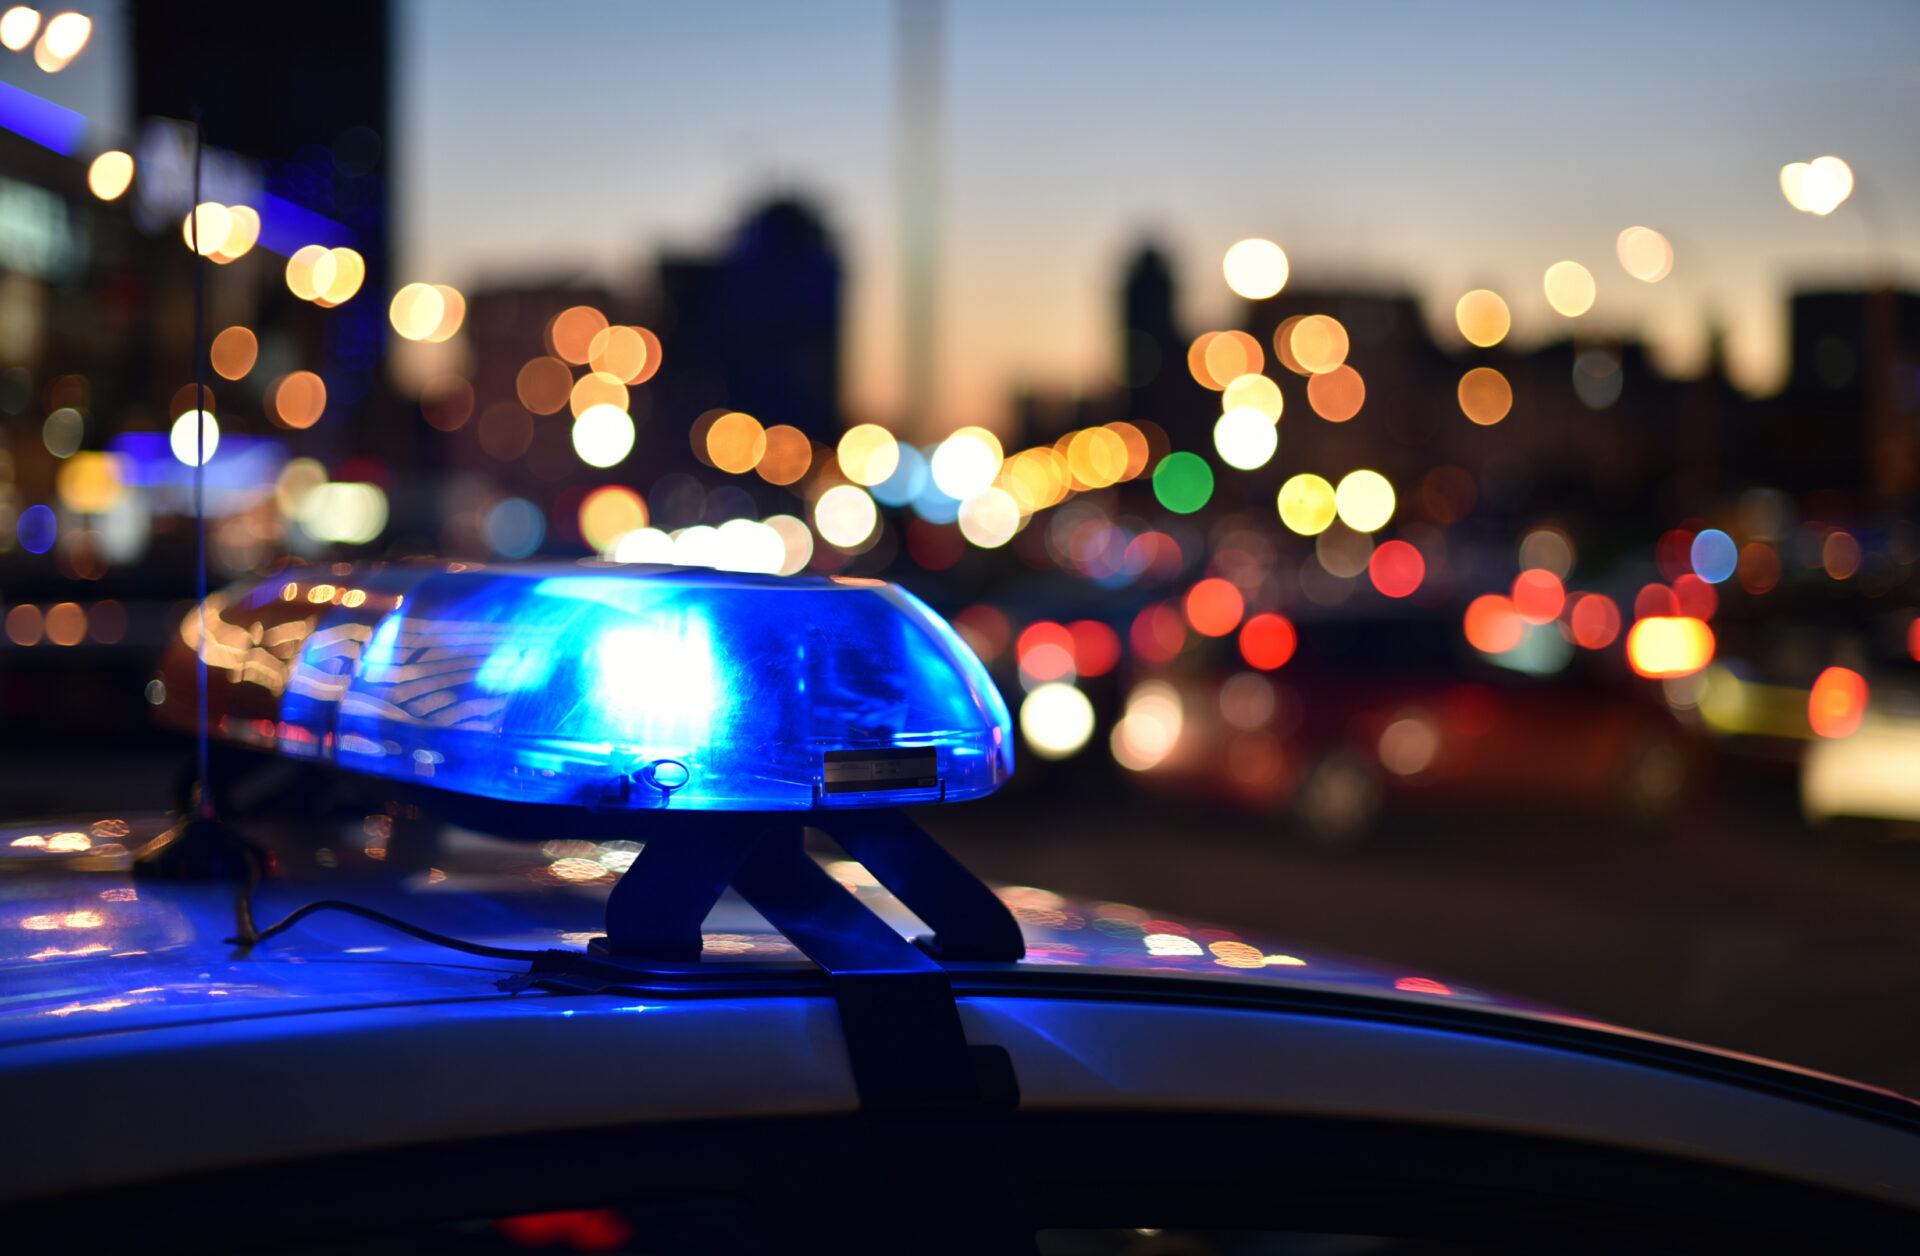 A vivid display of a police car's siren light illuminating the surroundings with vibrant flashes of red and blue.